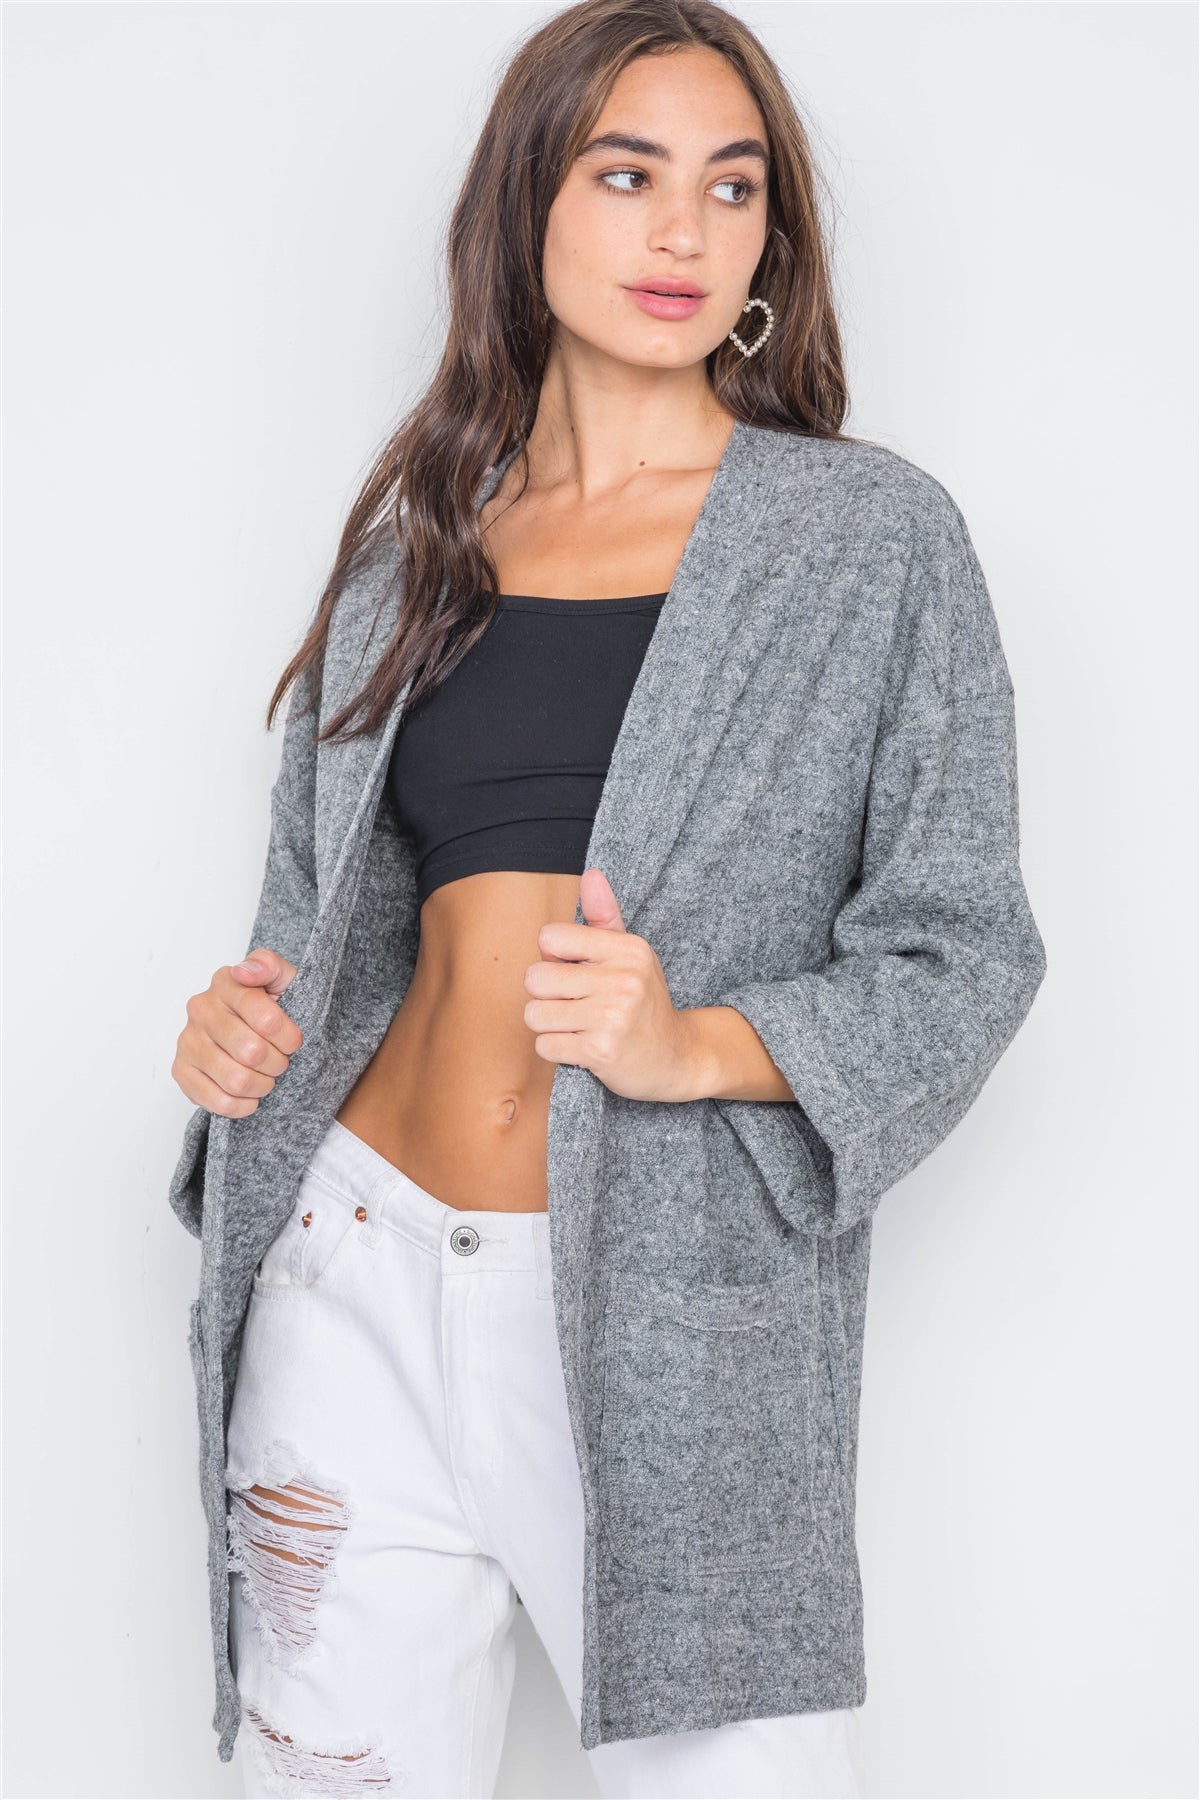 Heather Gray Open Front Cardigan